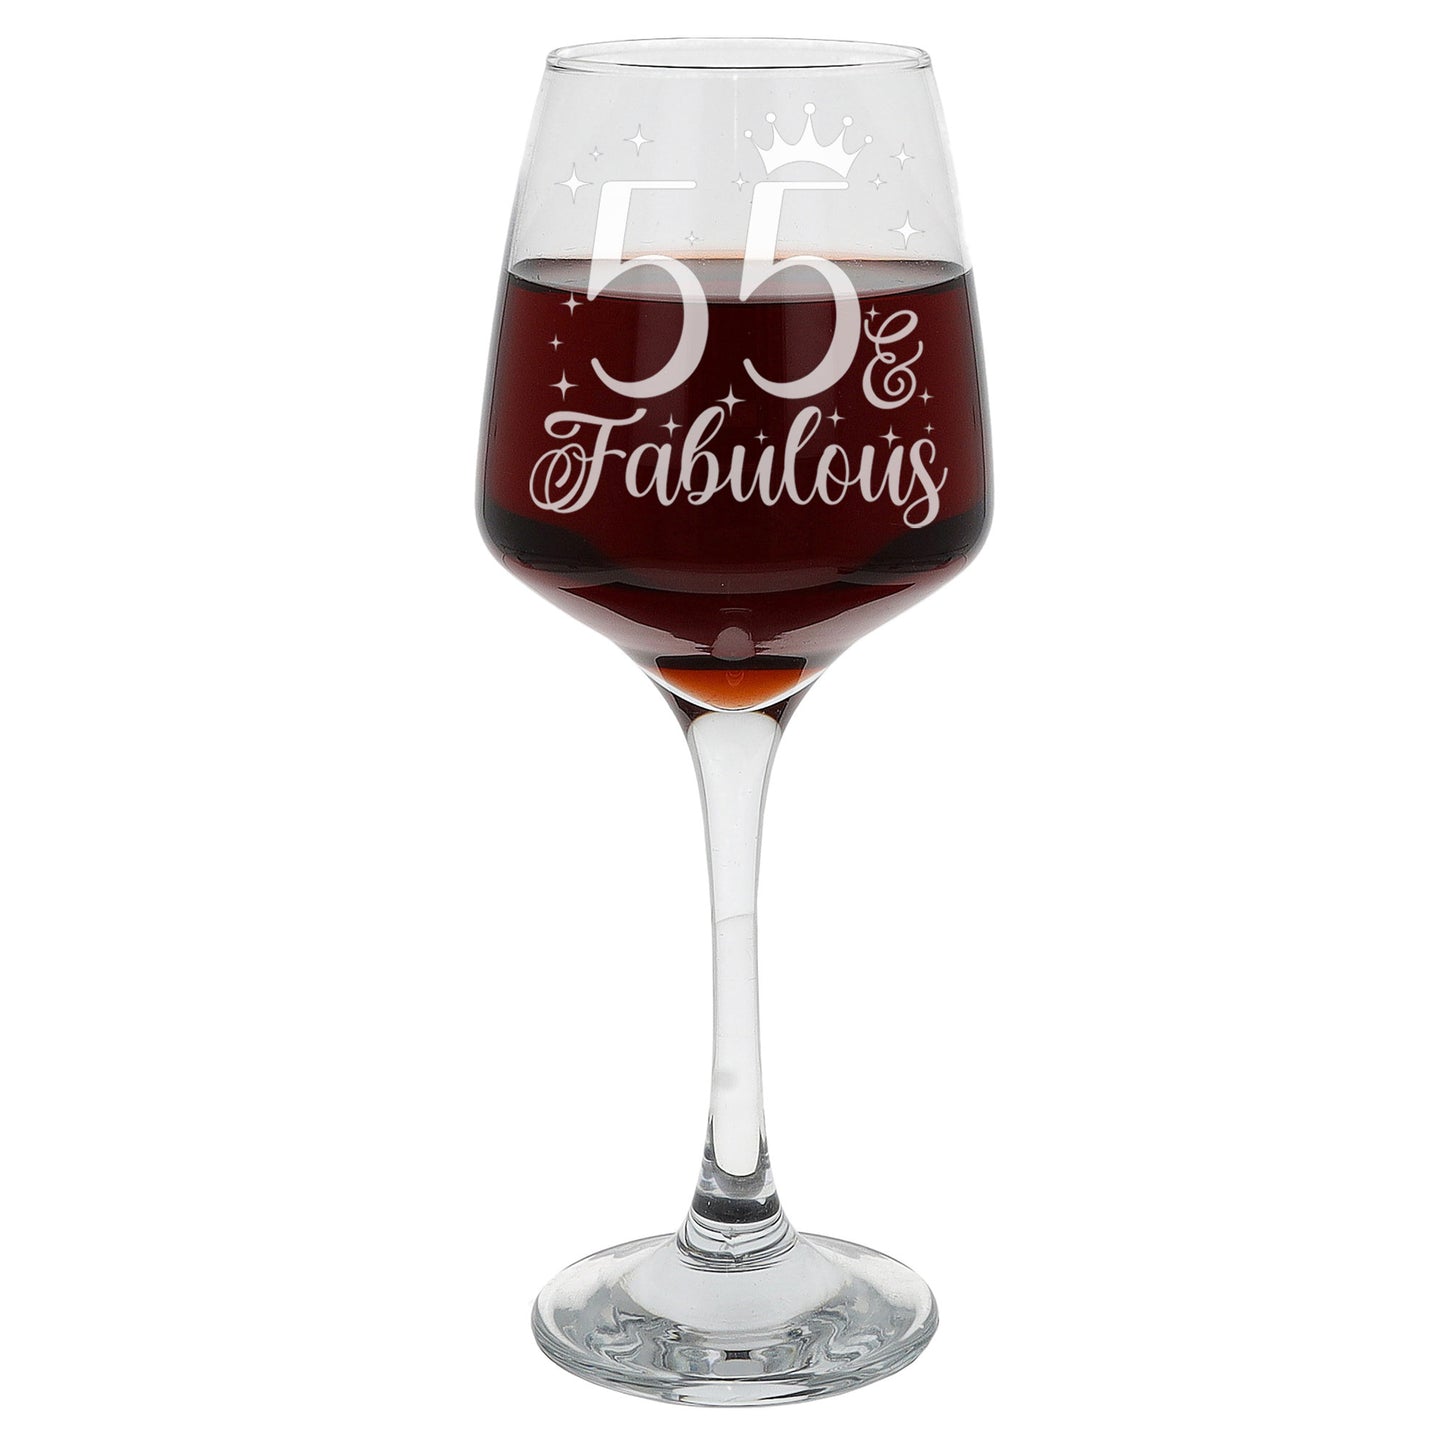 55 & Fabulous 55th Birthday Gift Engraved Wine Glass and/or Coaster Set  - Always Looking Good -   